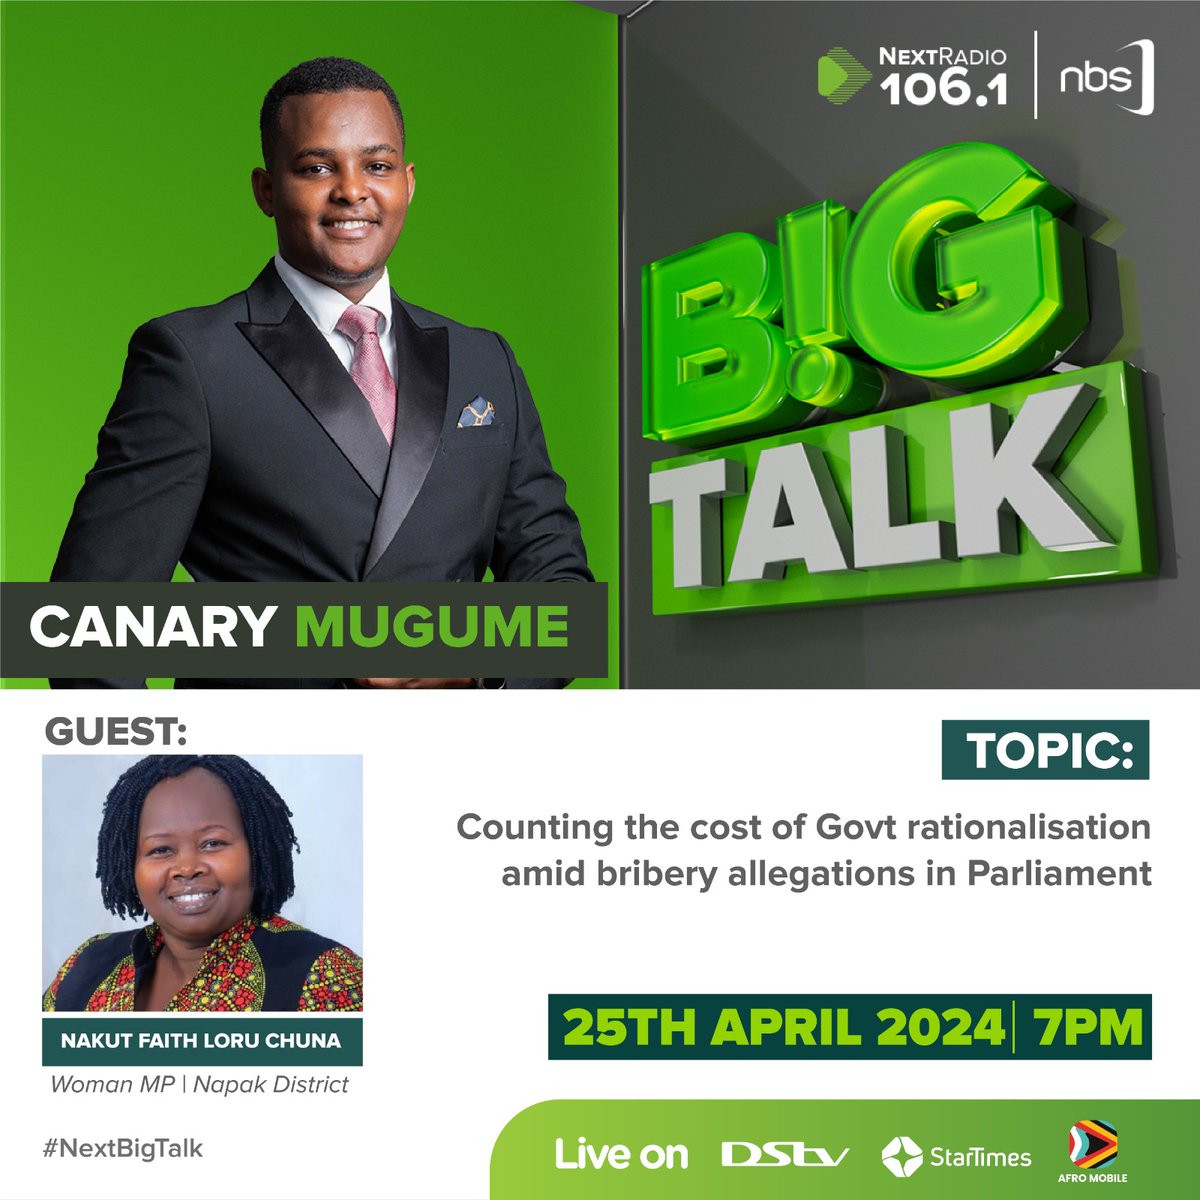 Catch the conversation on bribery allegations surrounding the government rationalization debate and more #NextBigTalk #NBSUpdates on @nextradio_ug